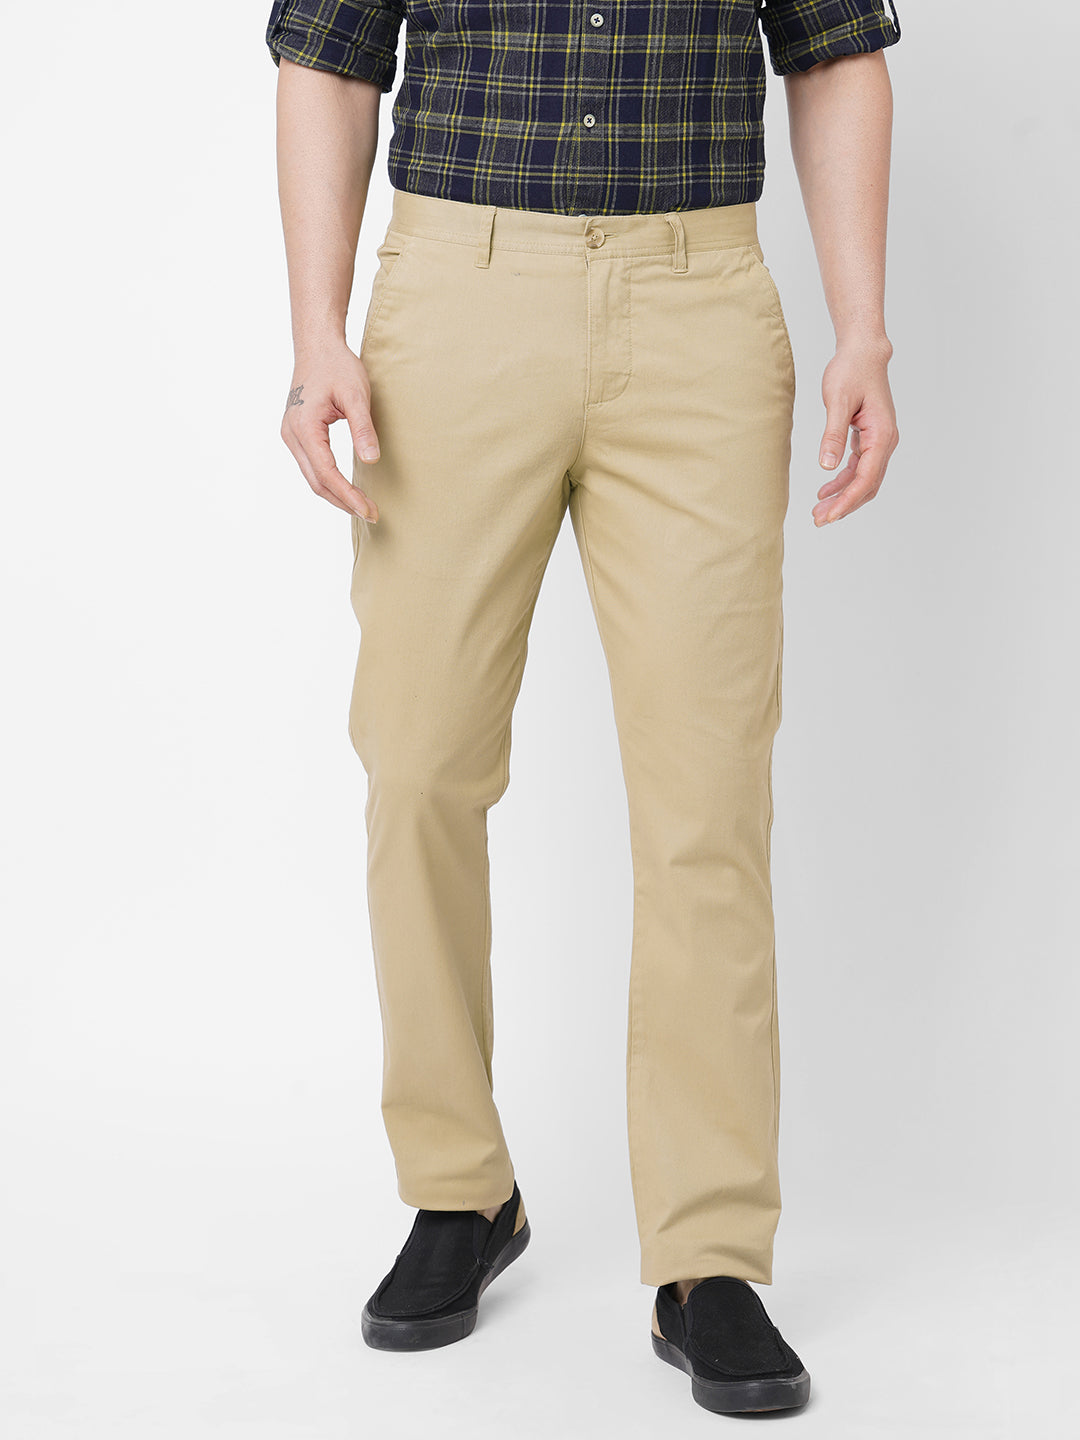 Which shirt is best match with khaki pants  Quora